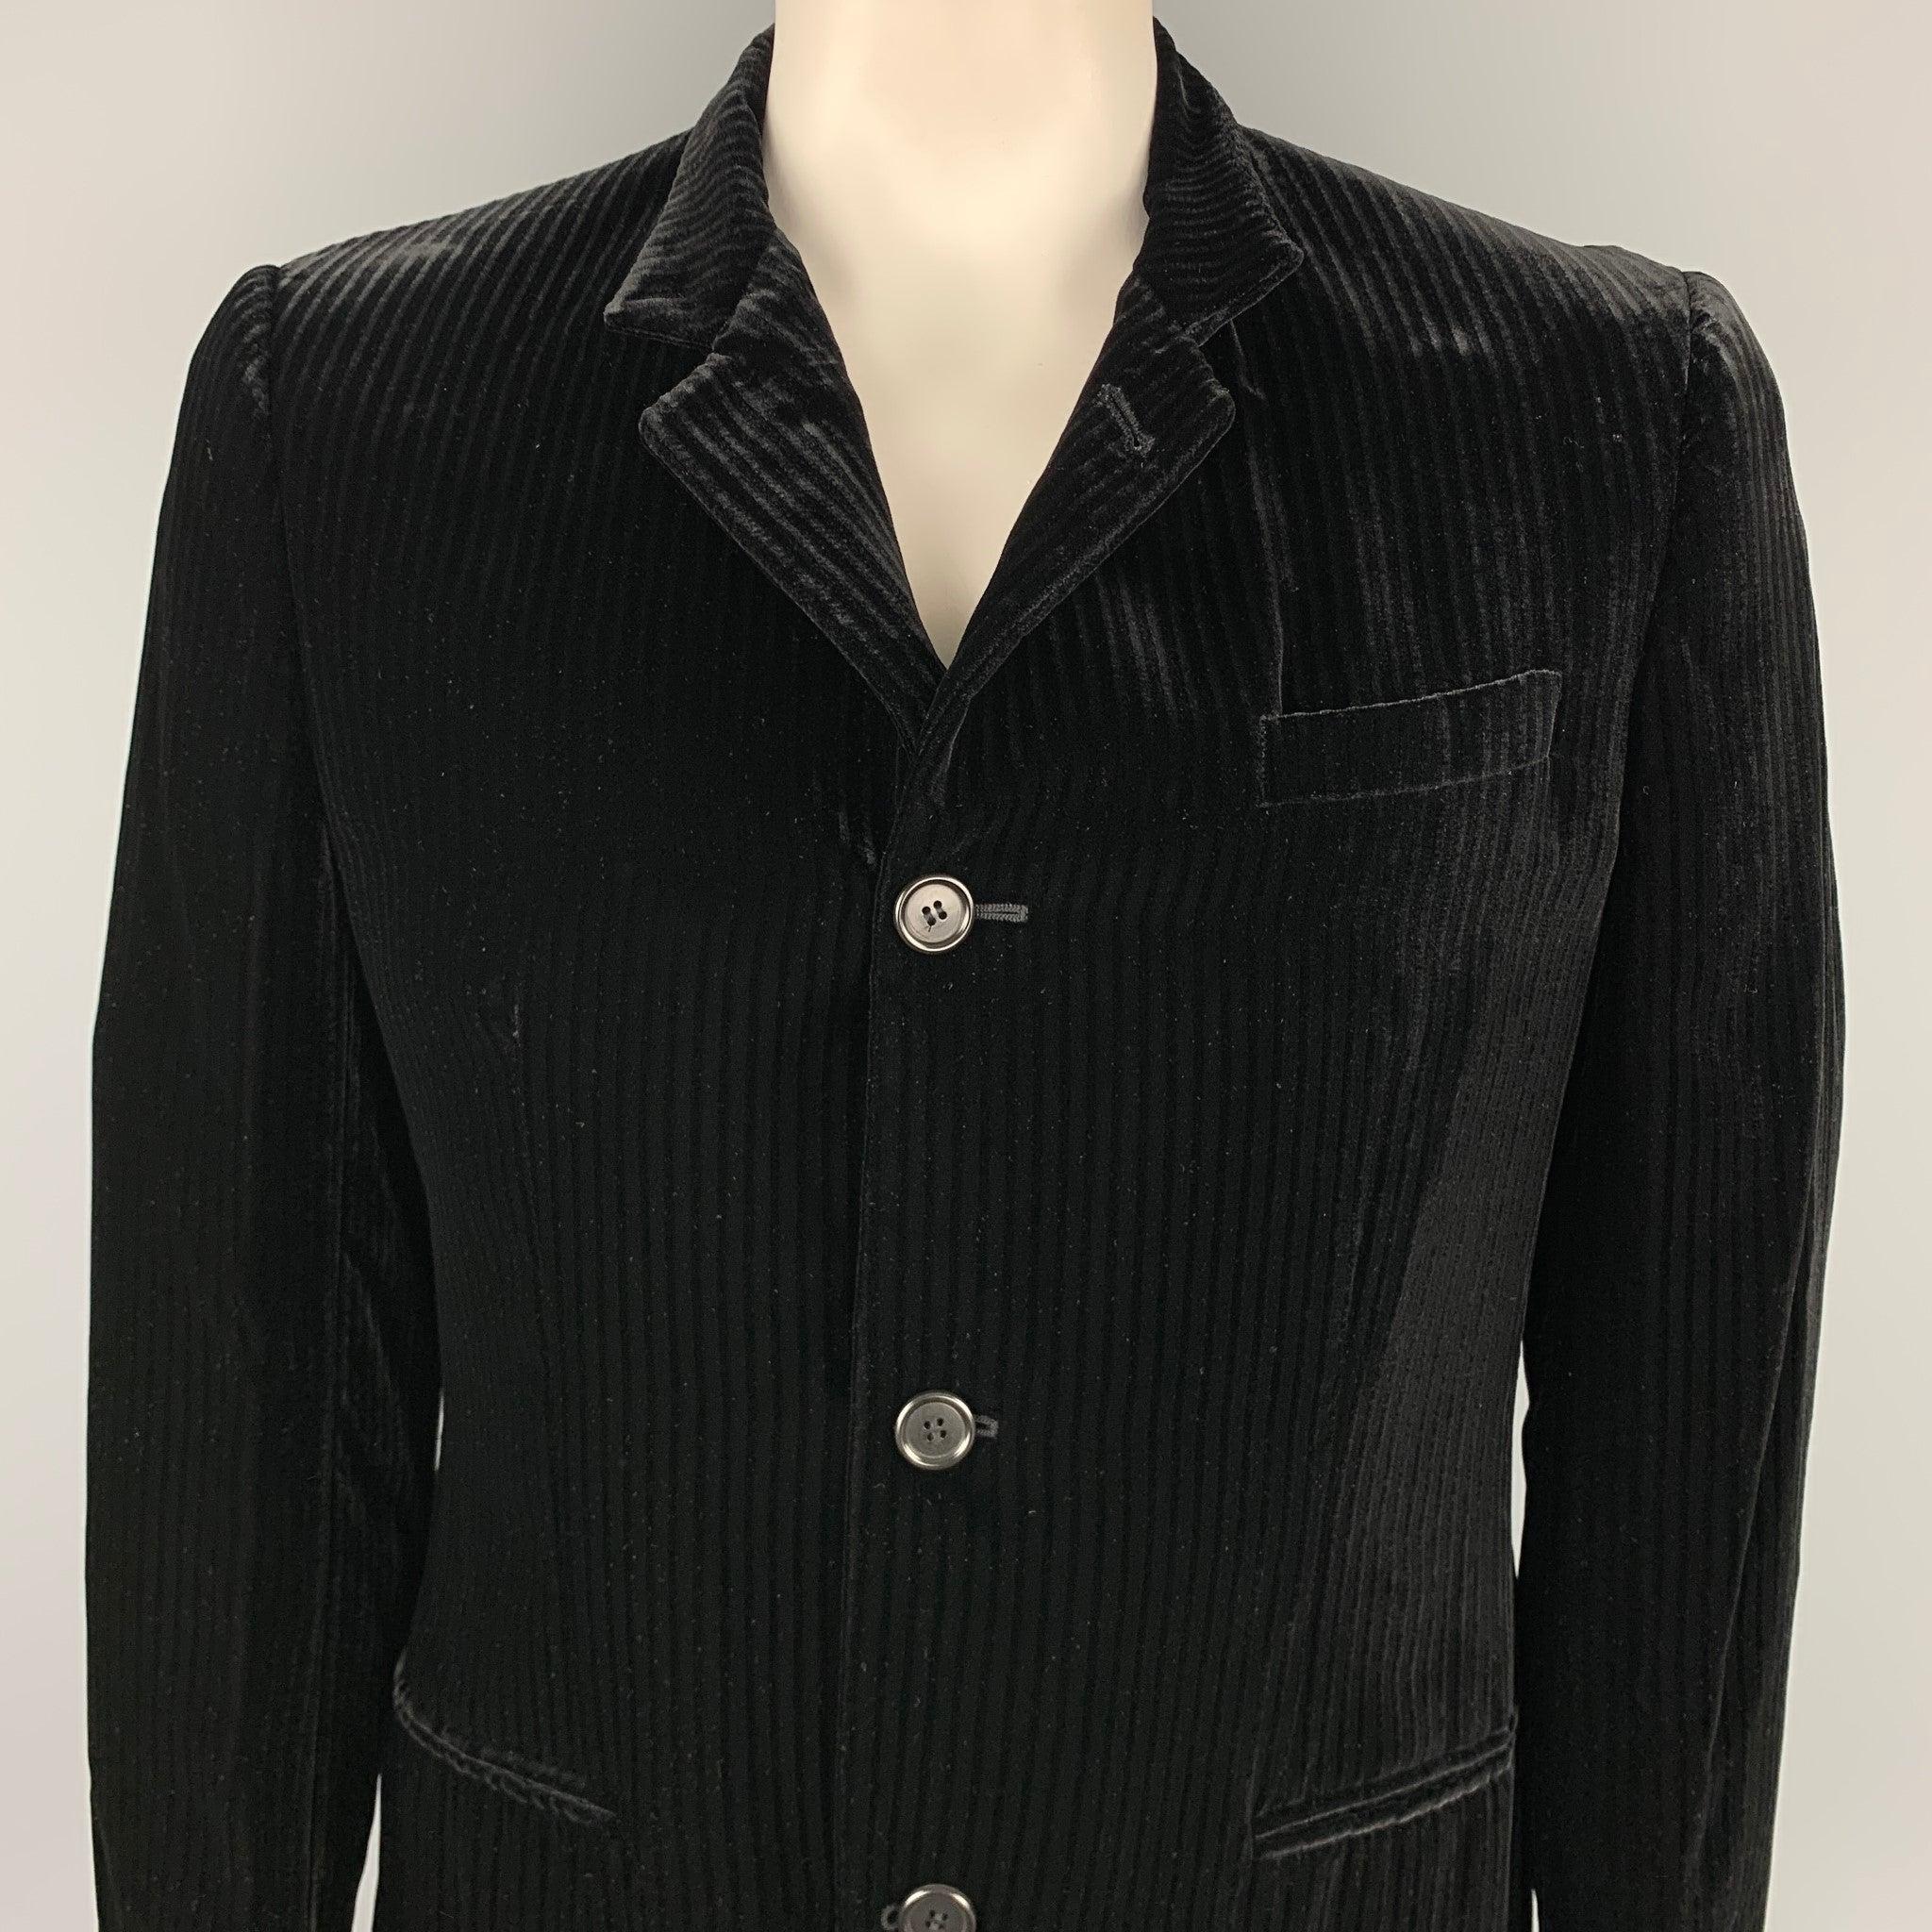 GIORGIO ARMANI jacket comes in a black stripe rayon velvet featuring a spread collar, slit pockets, and a buttoned closure. Made in Italy.Very Good
 Pre-Owned Condition. 
 

 Marked:  IT 54
  
 

 Measurements: 
  
 Shoulder: 18.5 inches Chest: 44